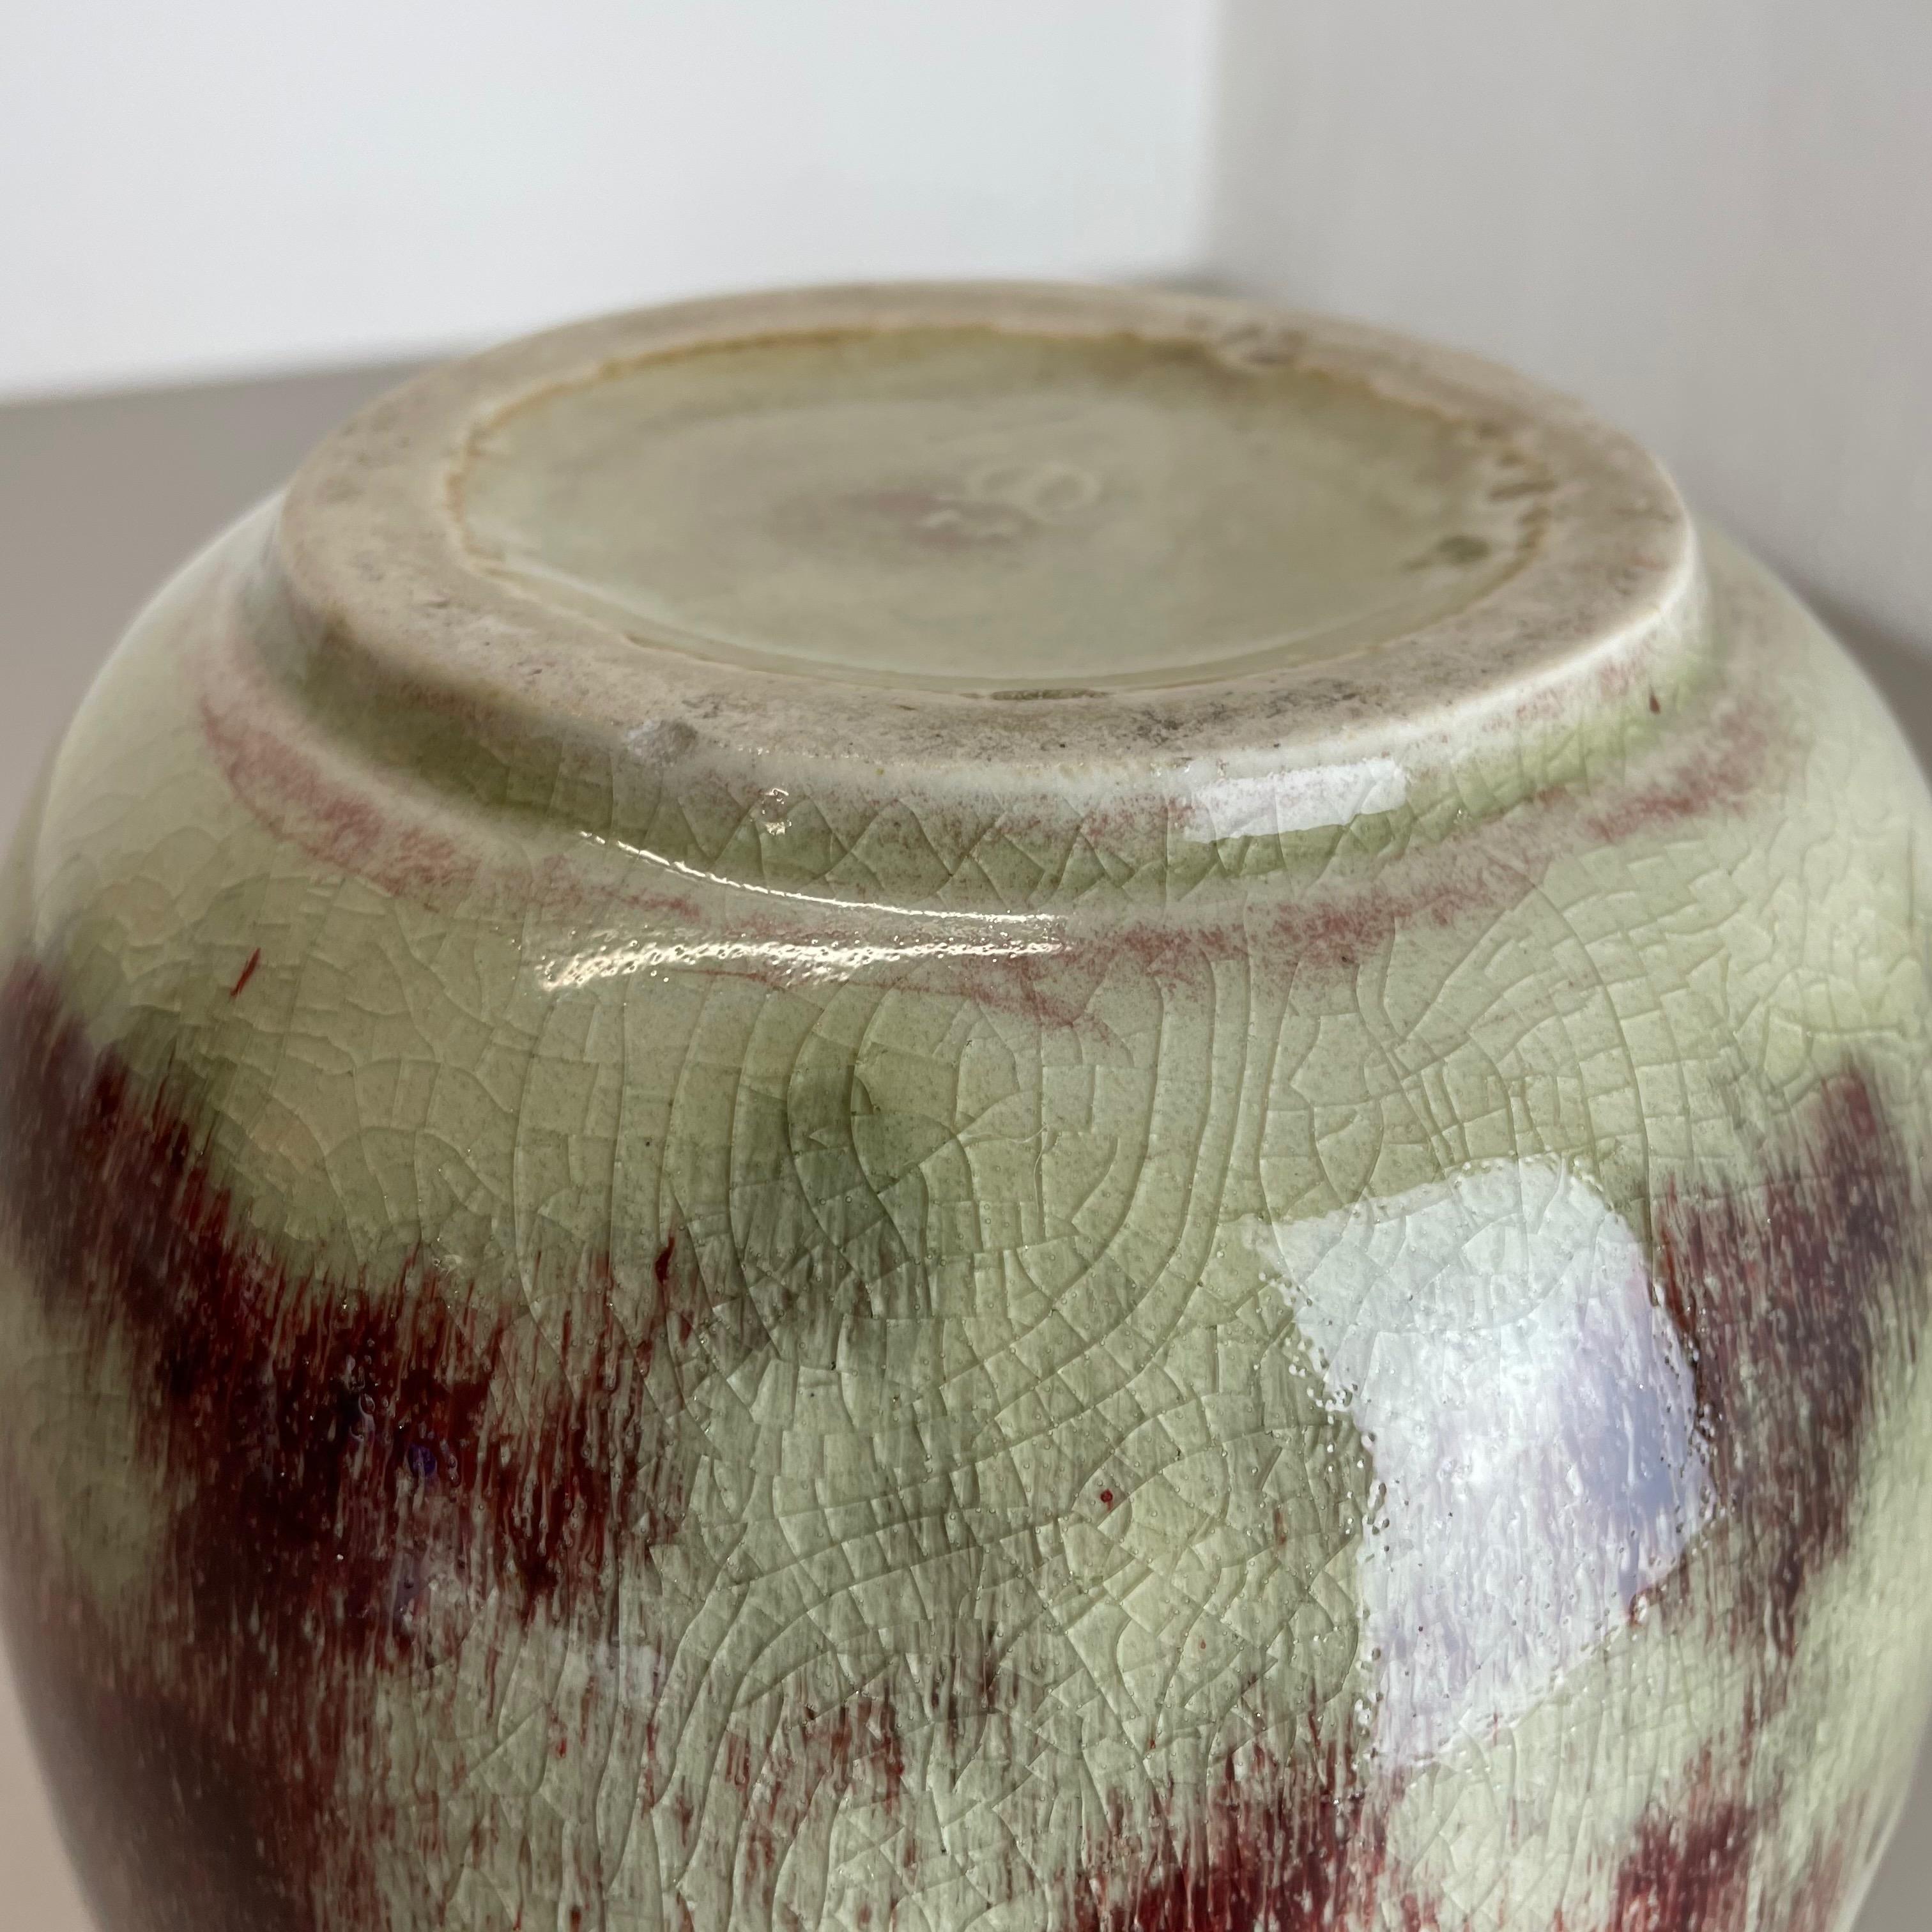 Unique Abstract Bauhaus Vase Pottery by WMF Ikora, Germany 1930s Art Deco For Sale 12